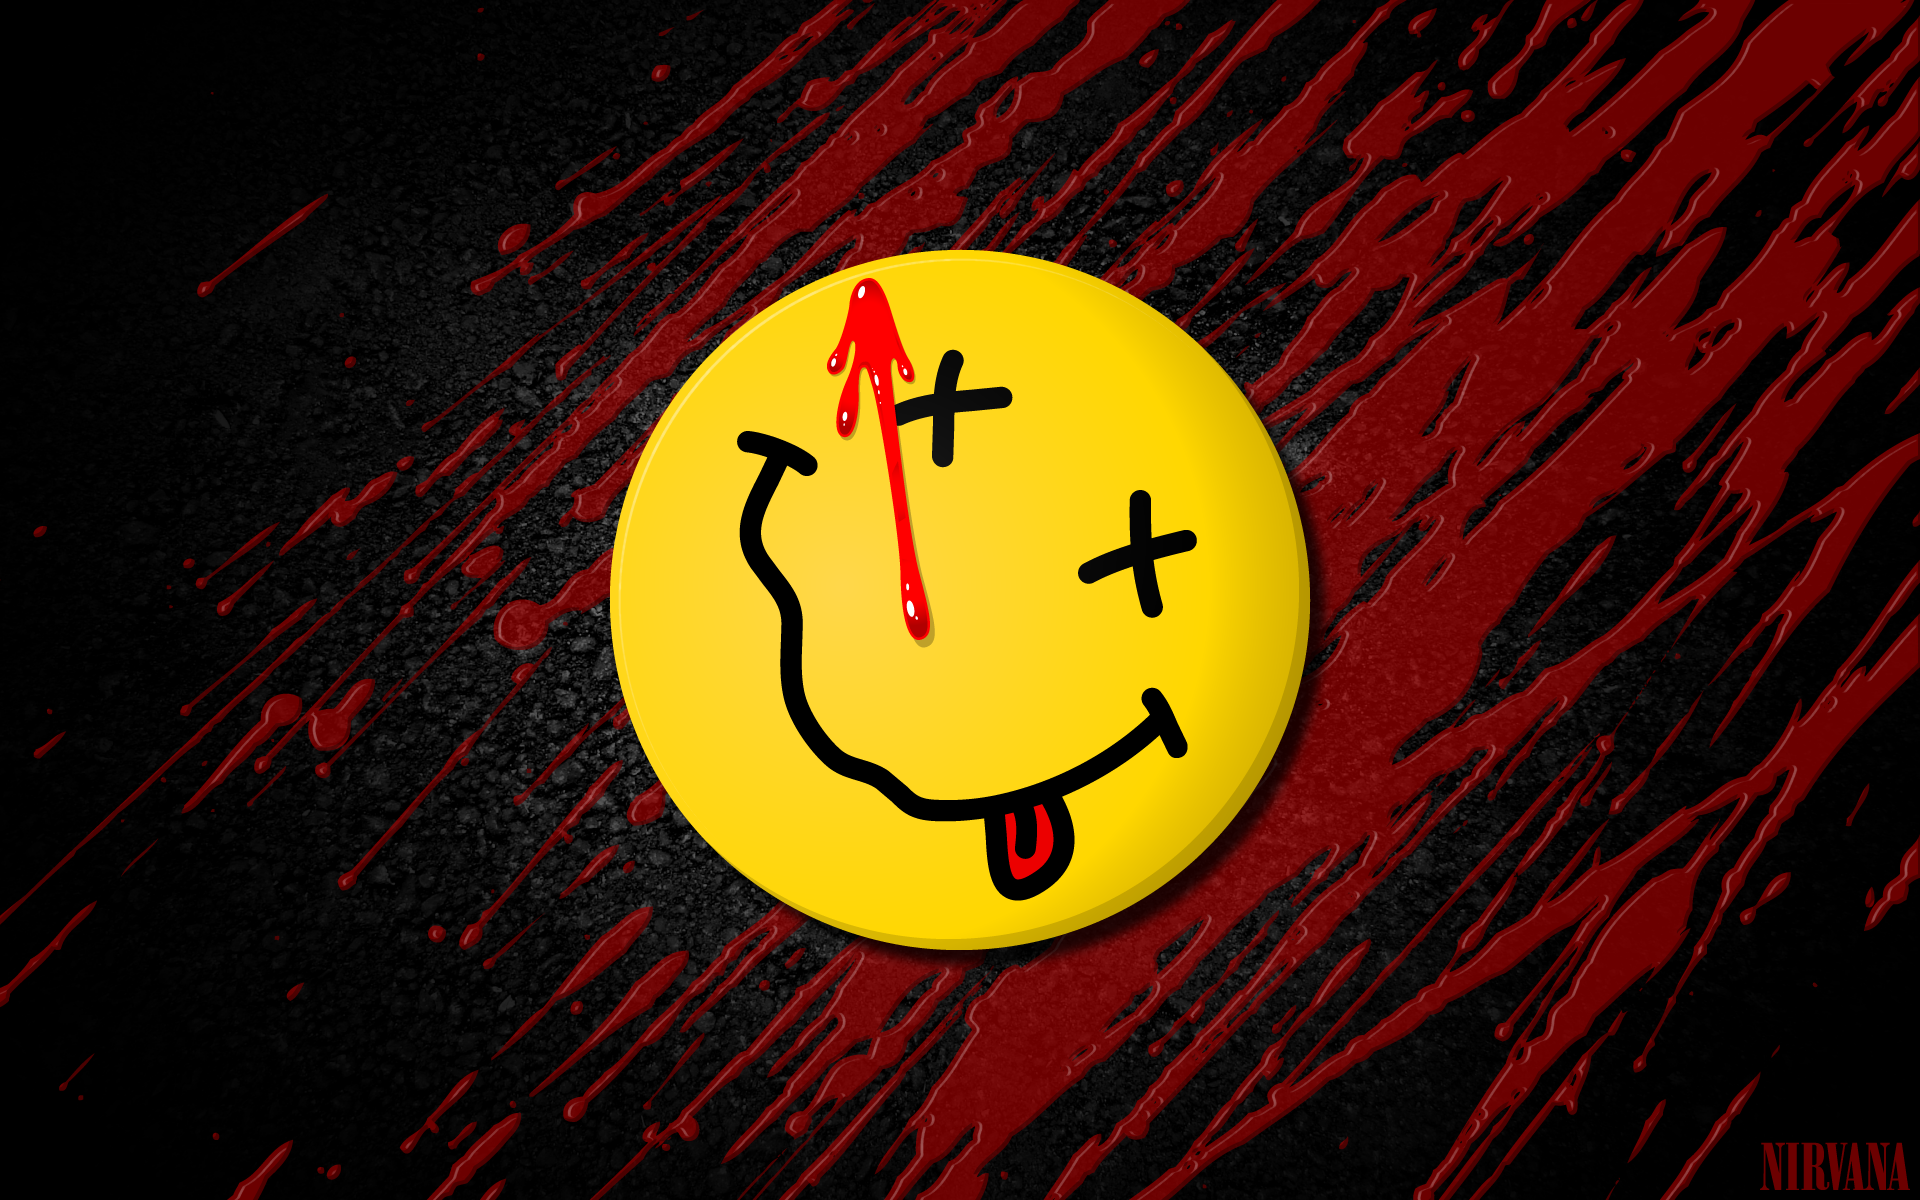 Nirvana Smiley Face Wallpapers